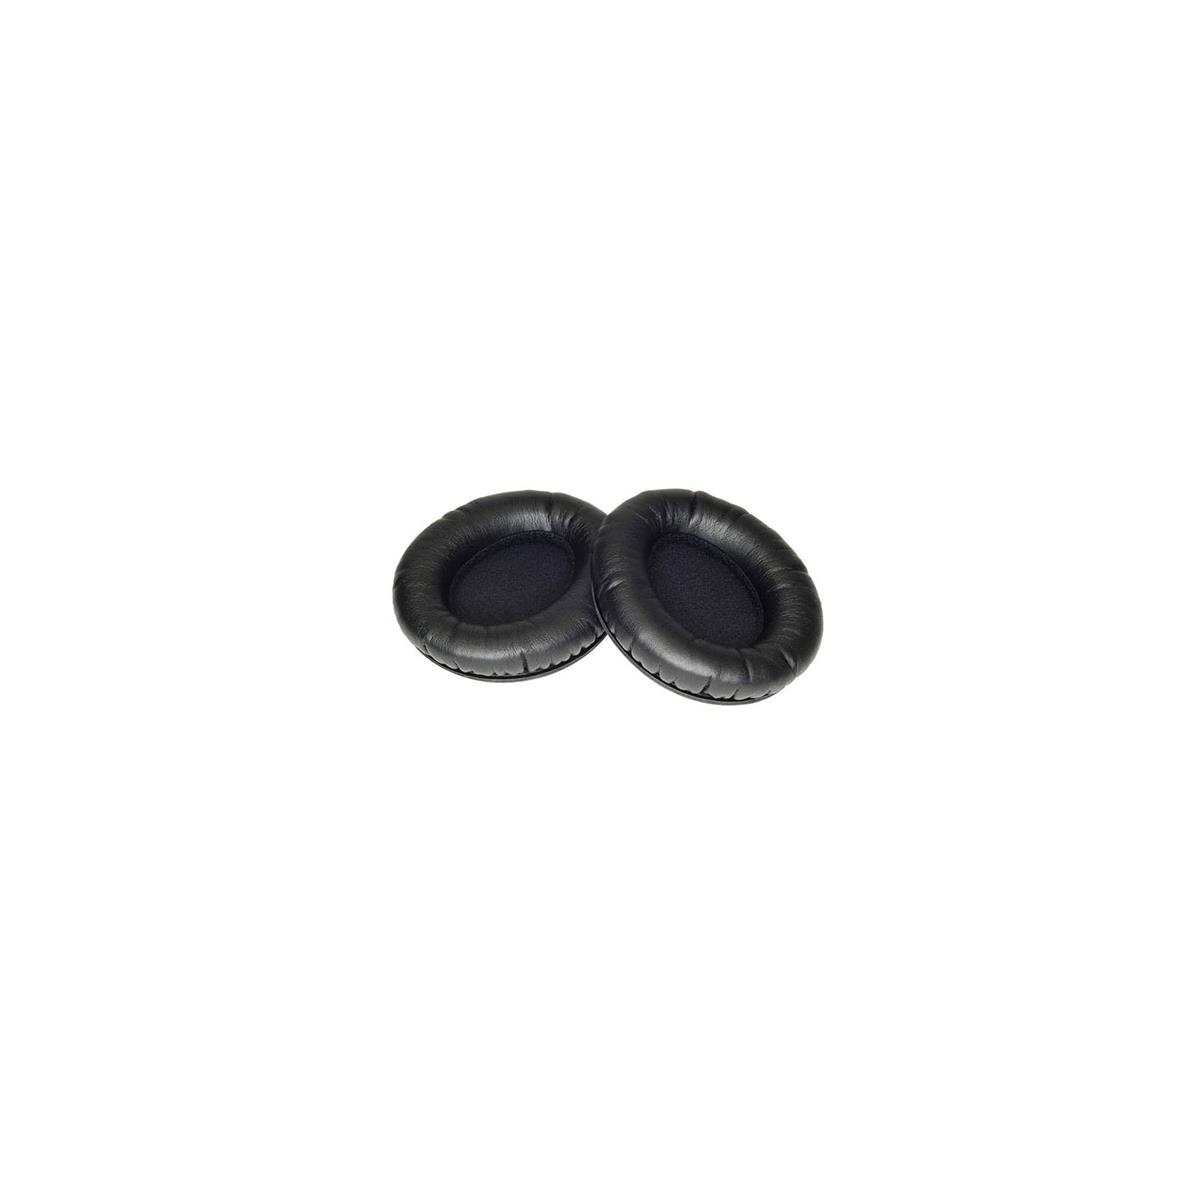 Image of KRK Ear Cushions for KNS-8400 Around-Ear Monitor